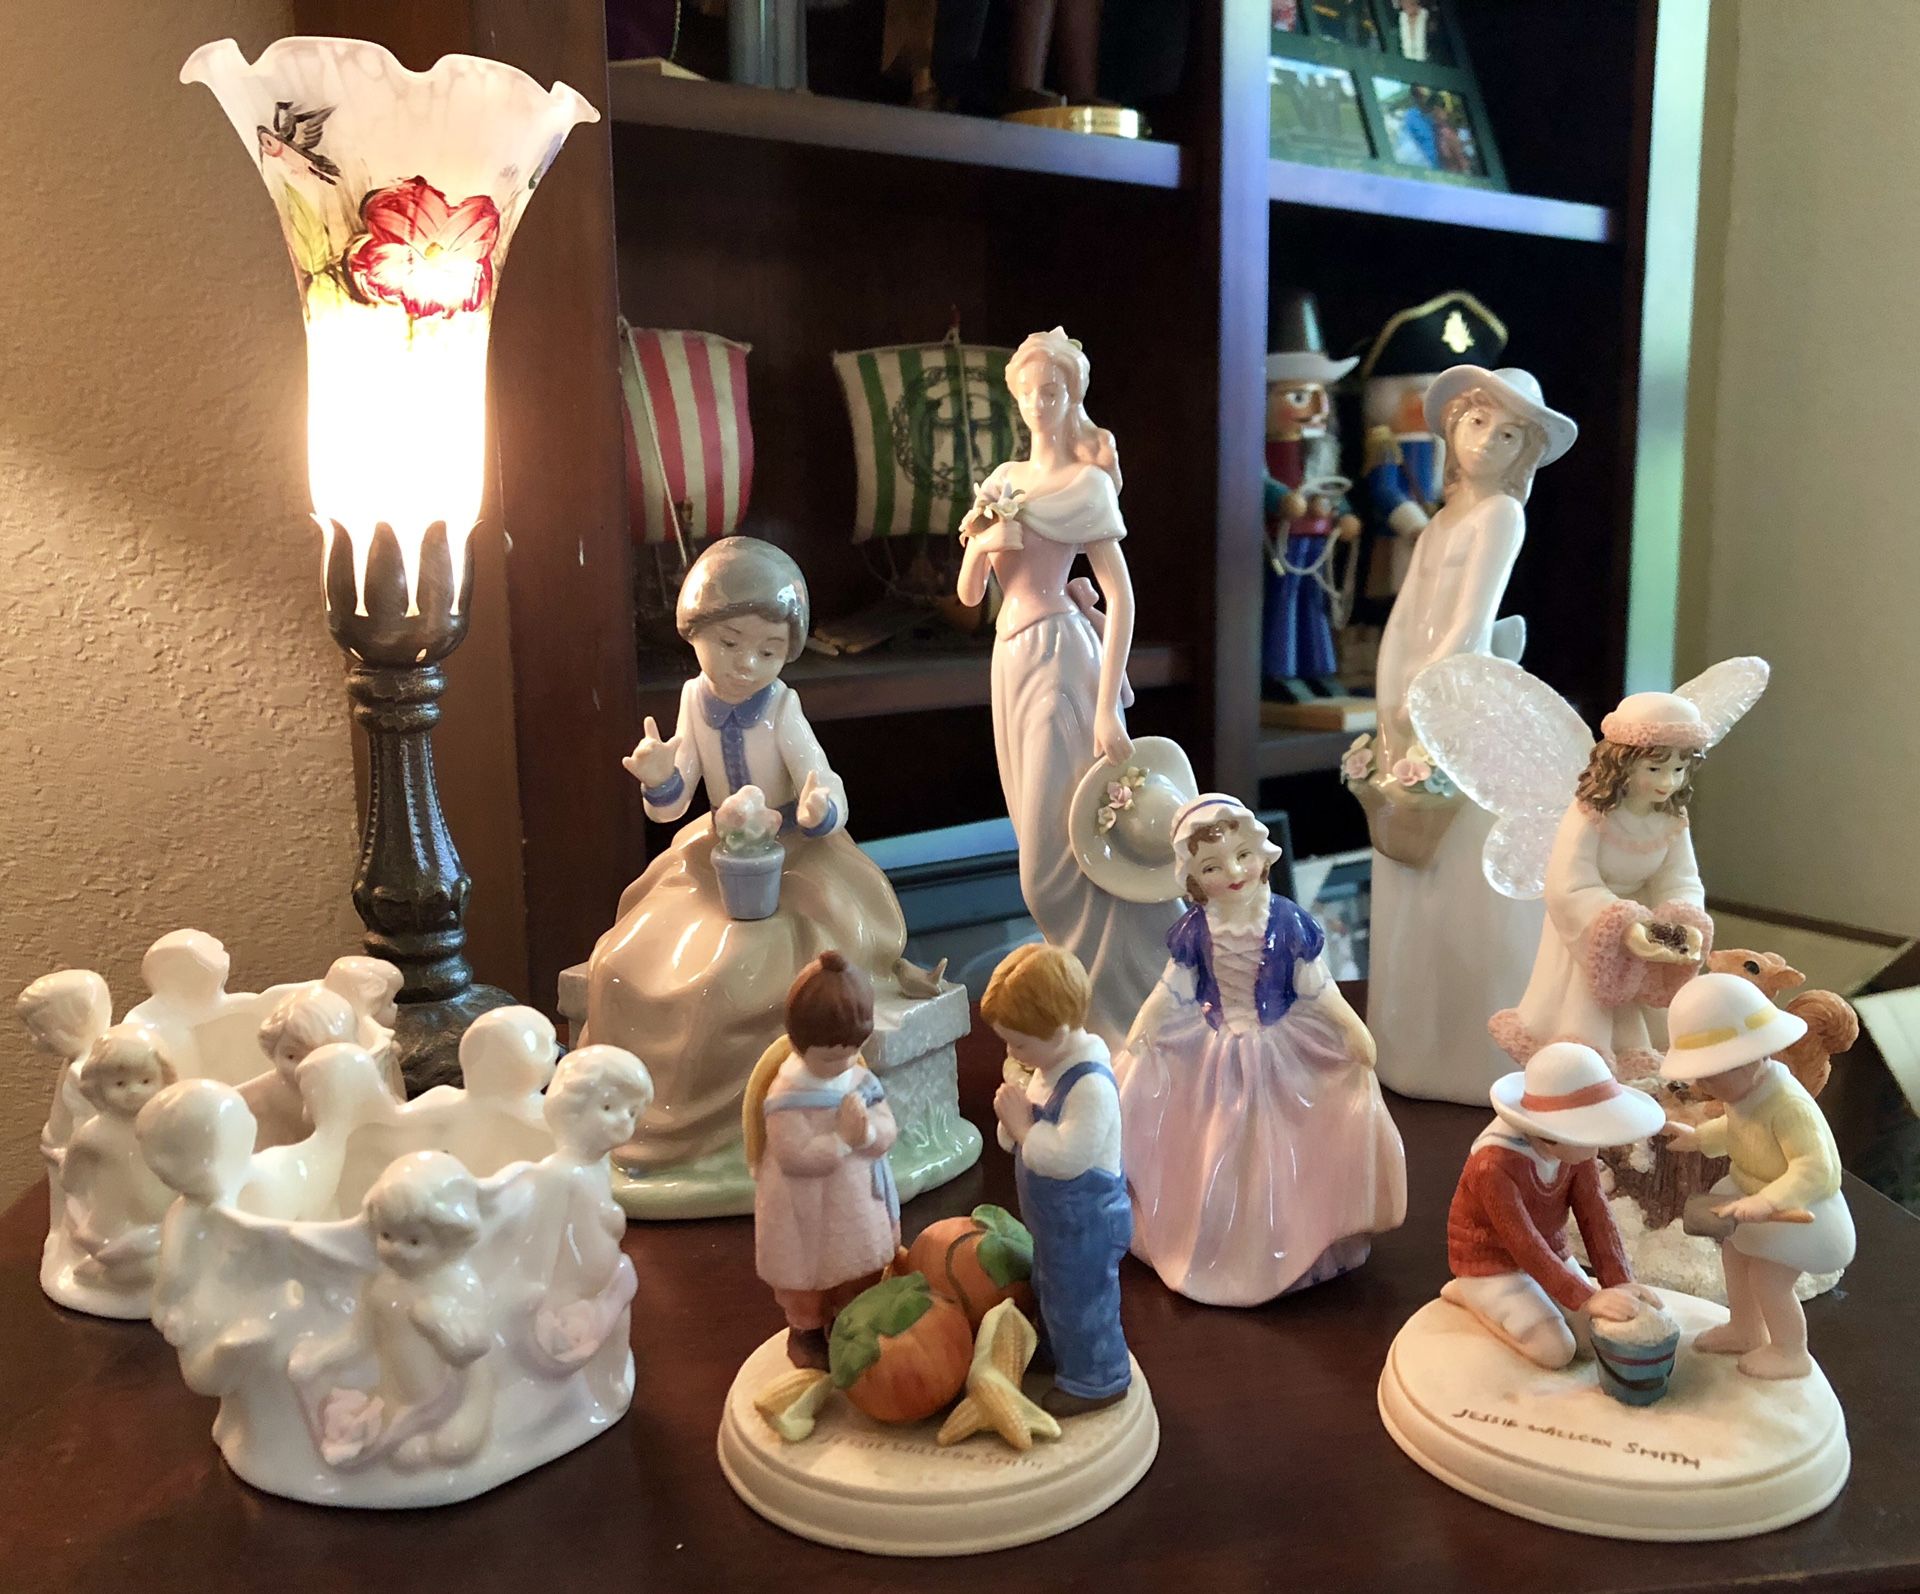 Porcelain figurines and lamp